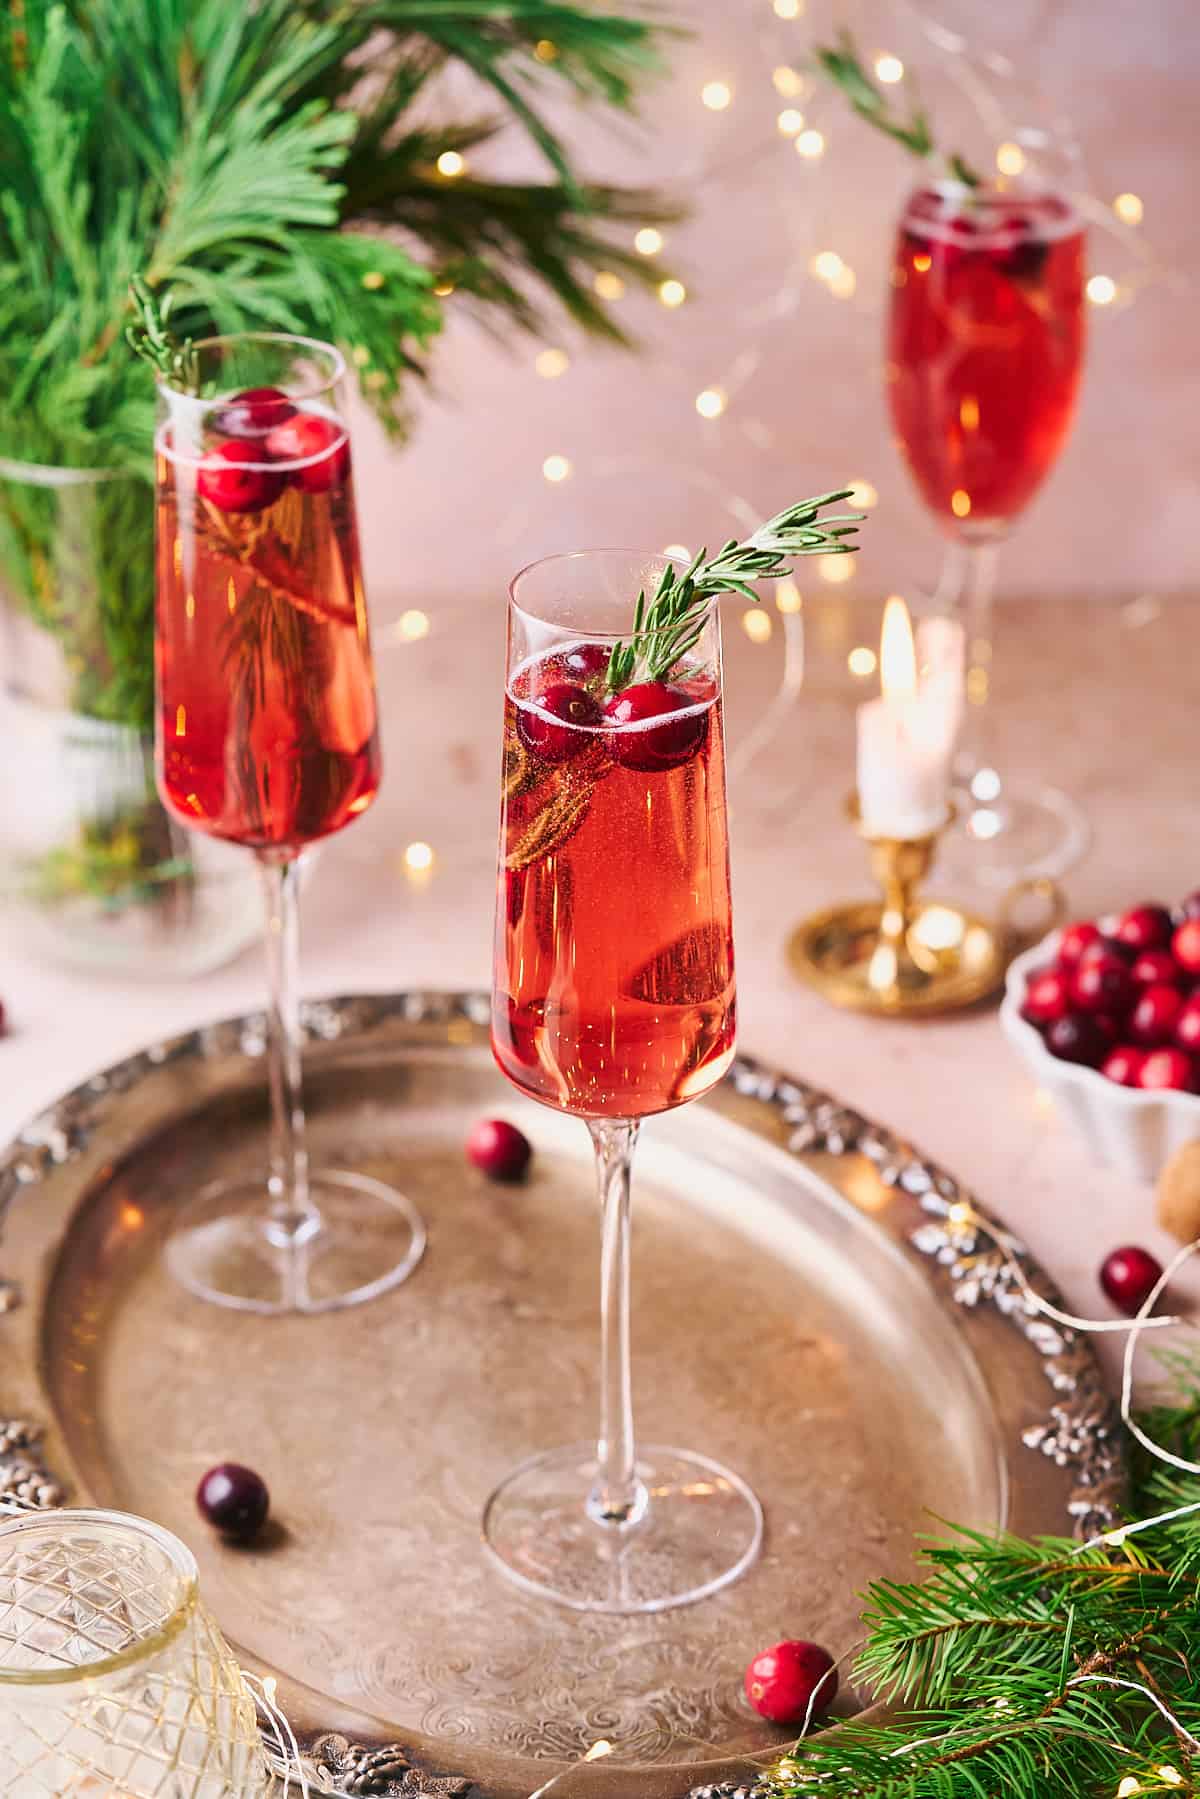 3 stunning bright red cocktails in champagne flutes with rosemary and cranberries, with garland and twinkling lights in the background.  